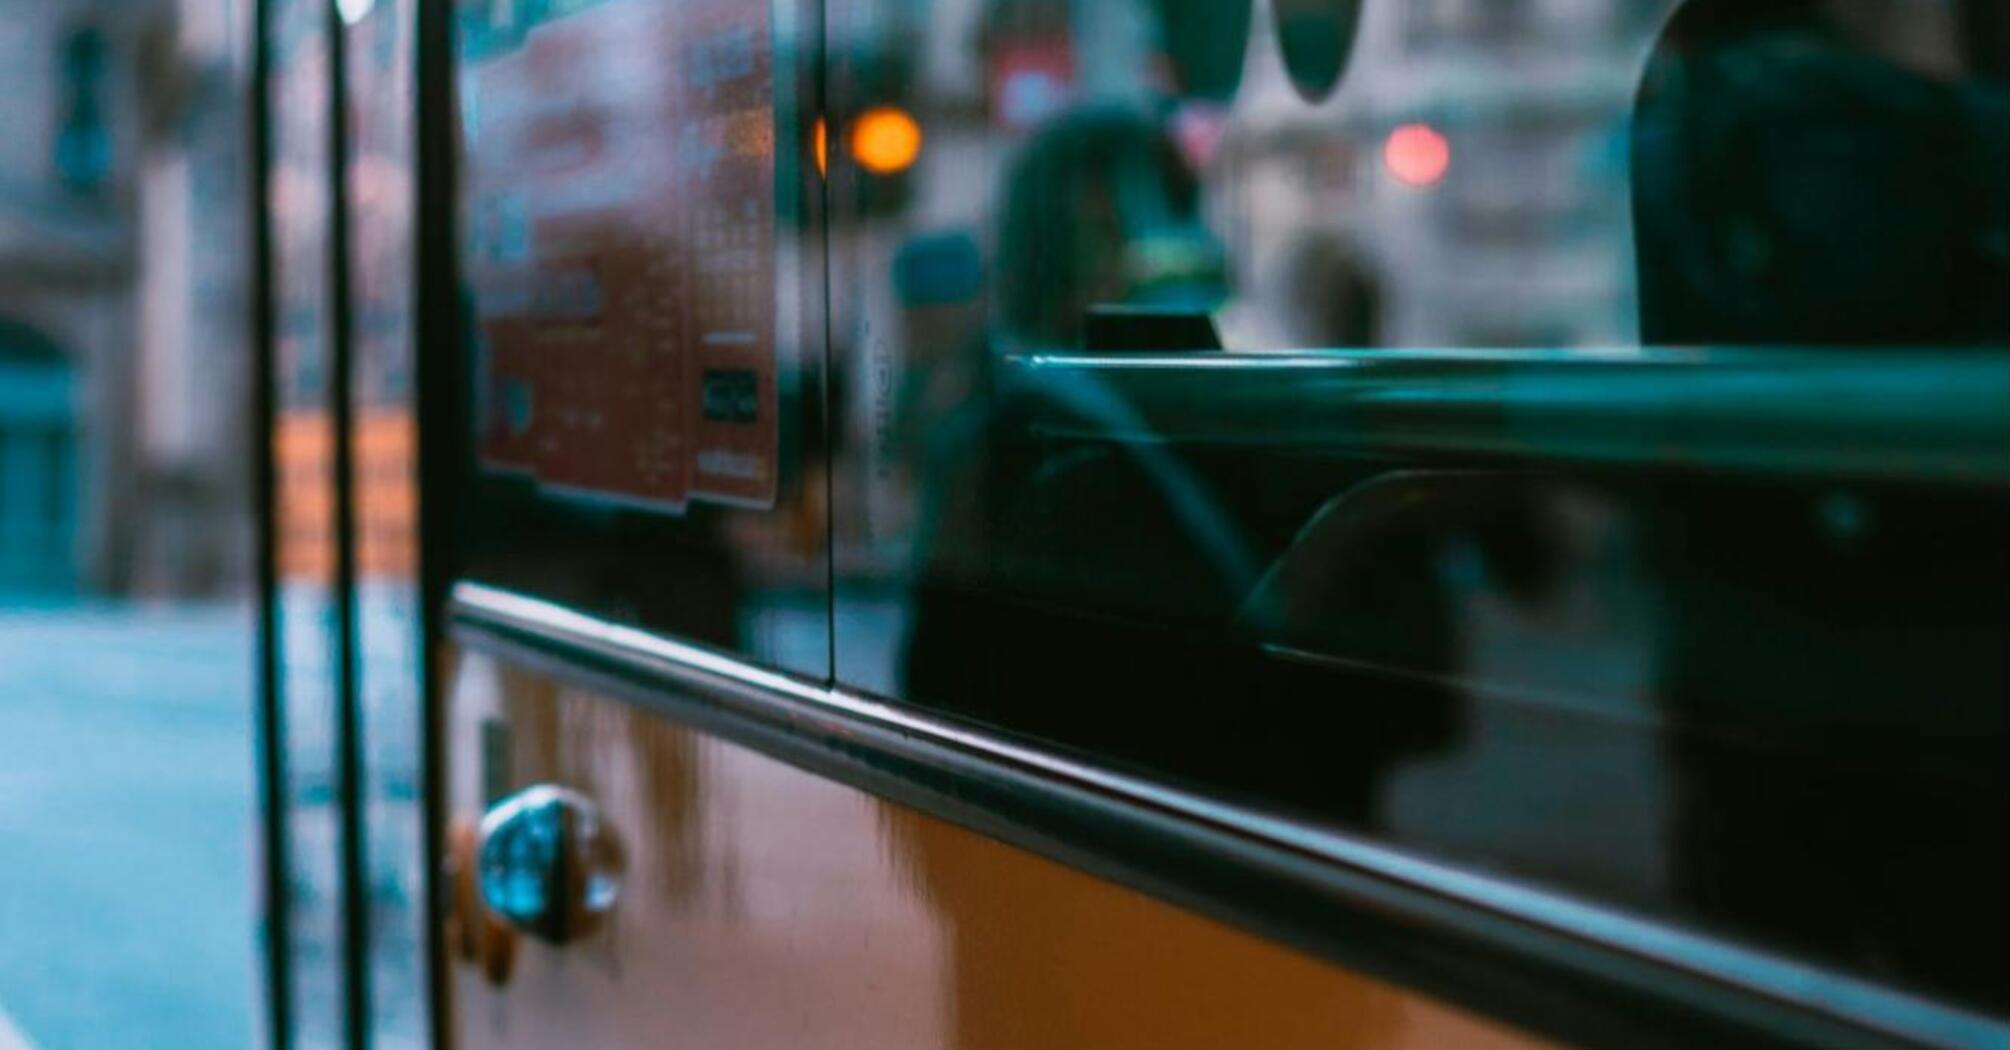 Close-up of a bus on a city street